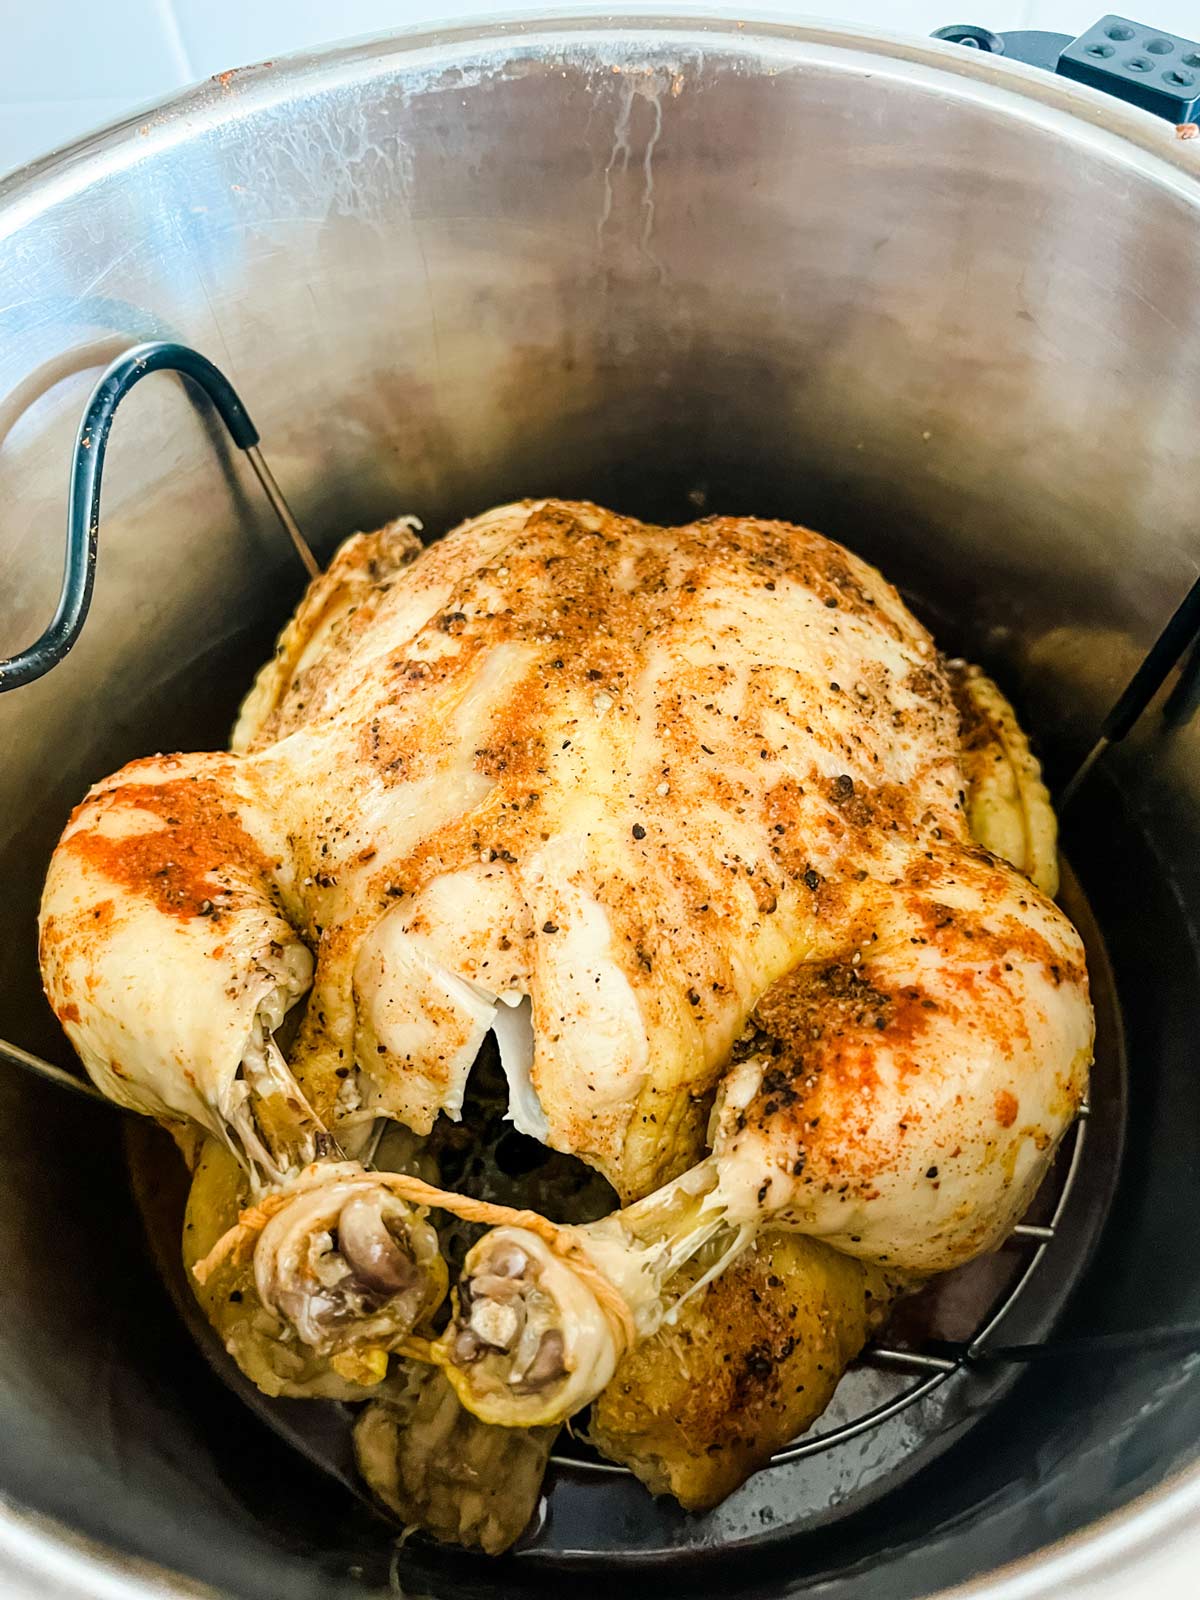 A cooked whole chicken in an Instant Pot.